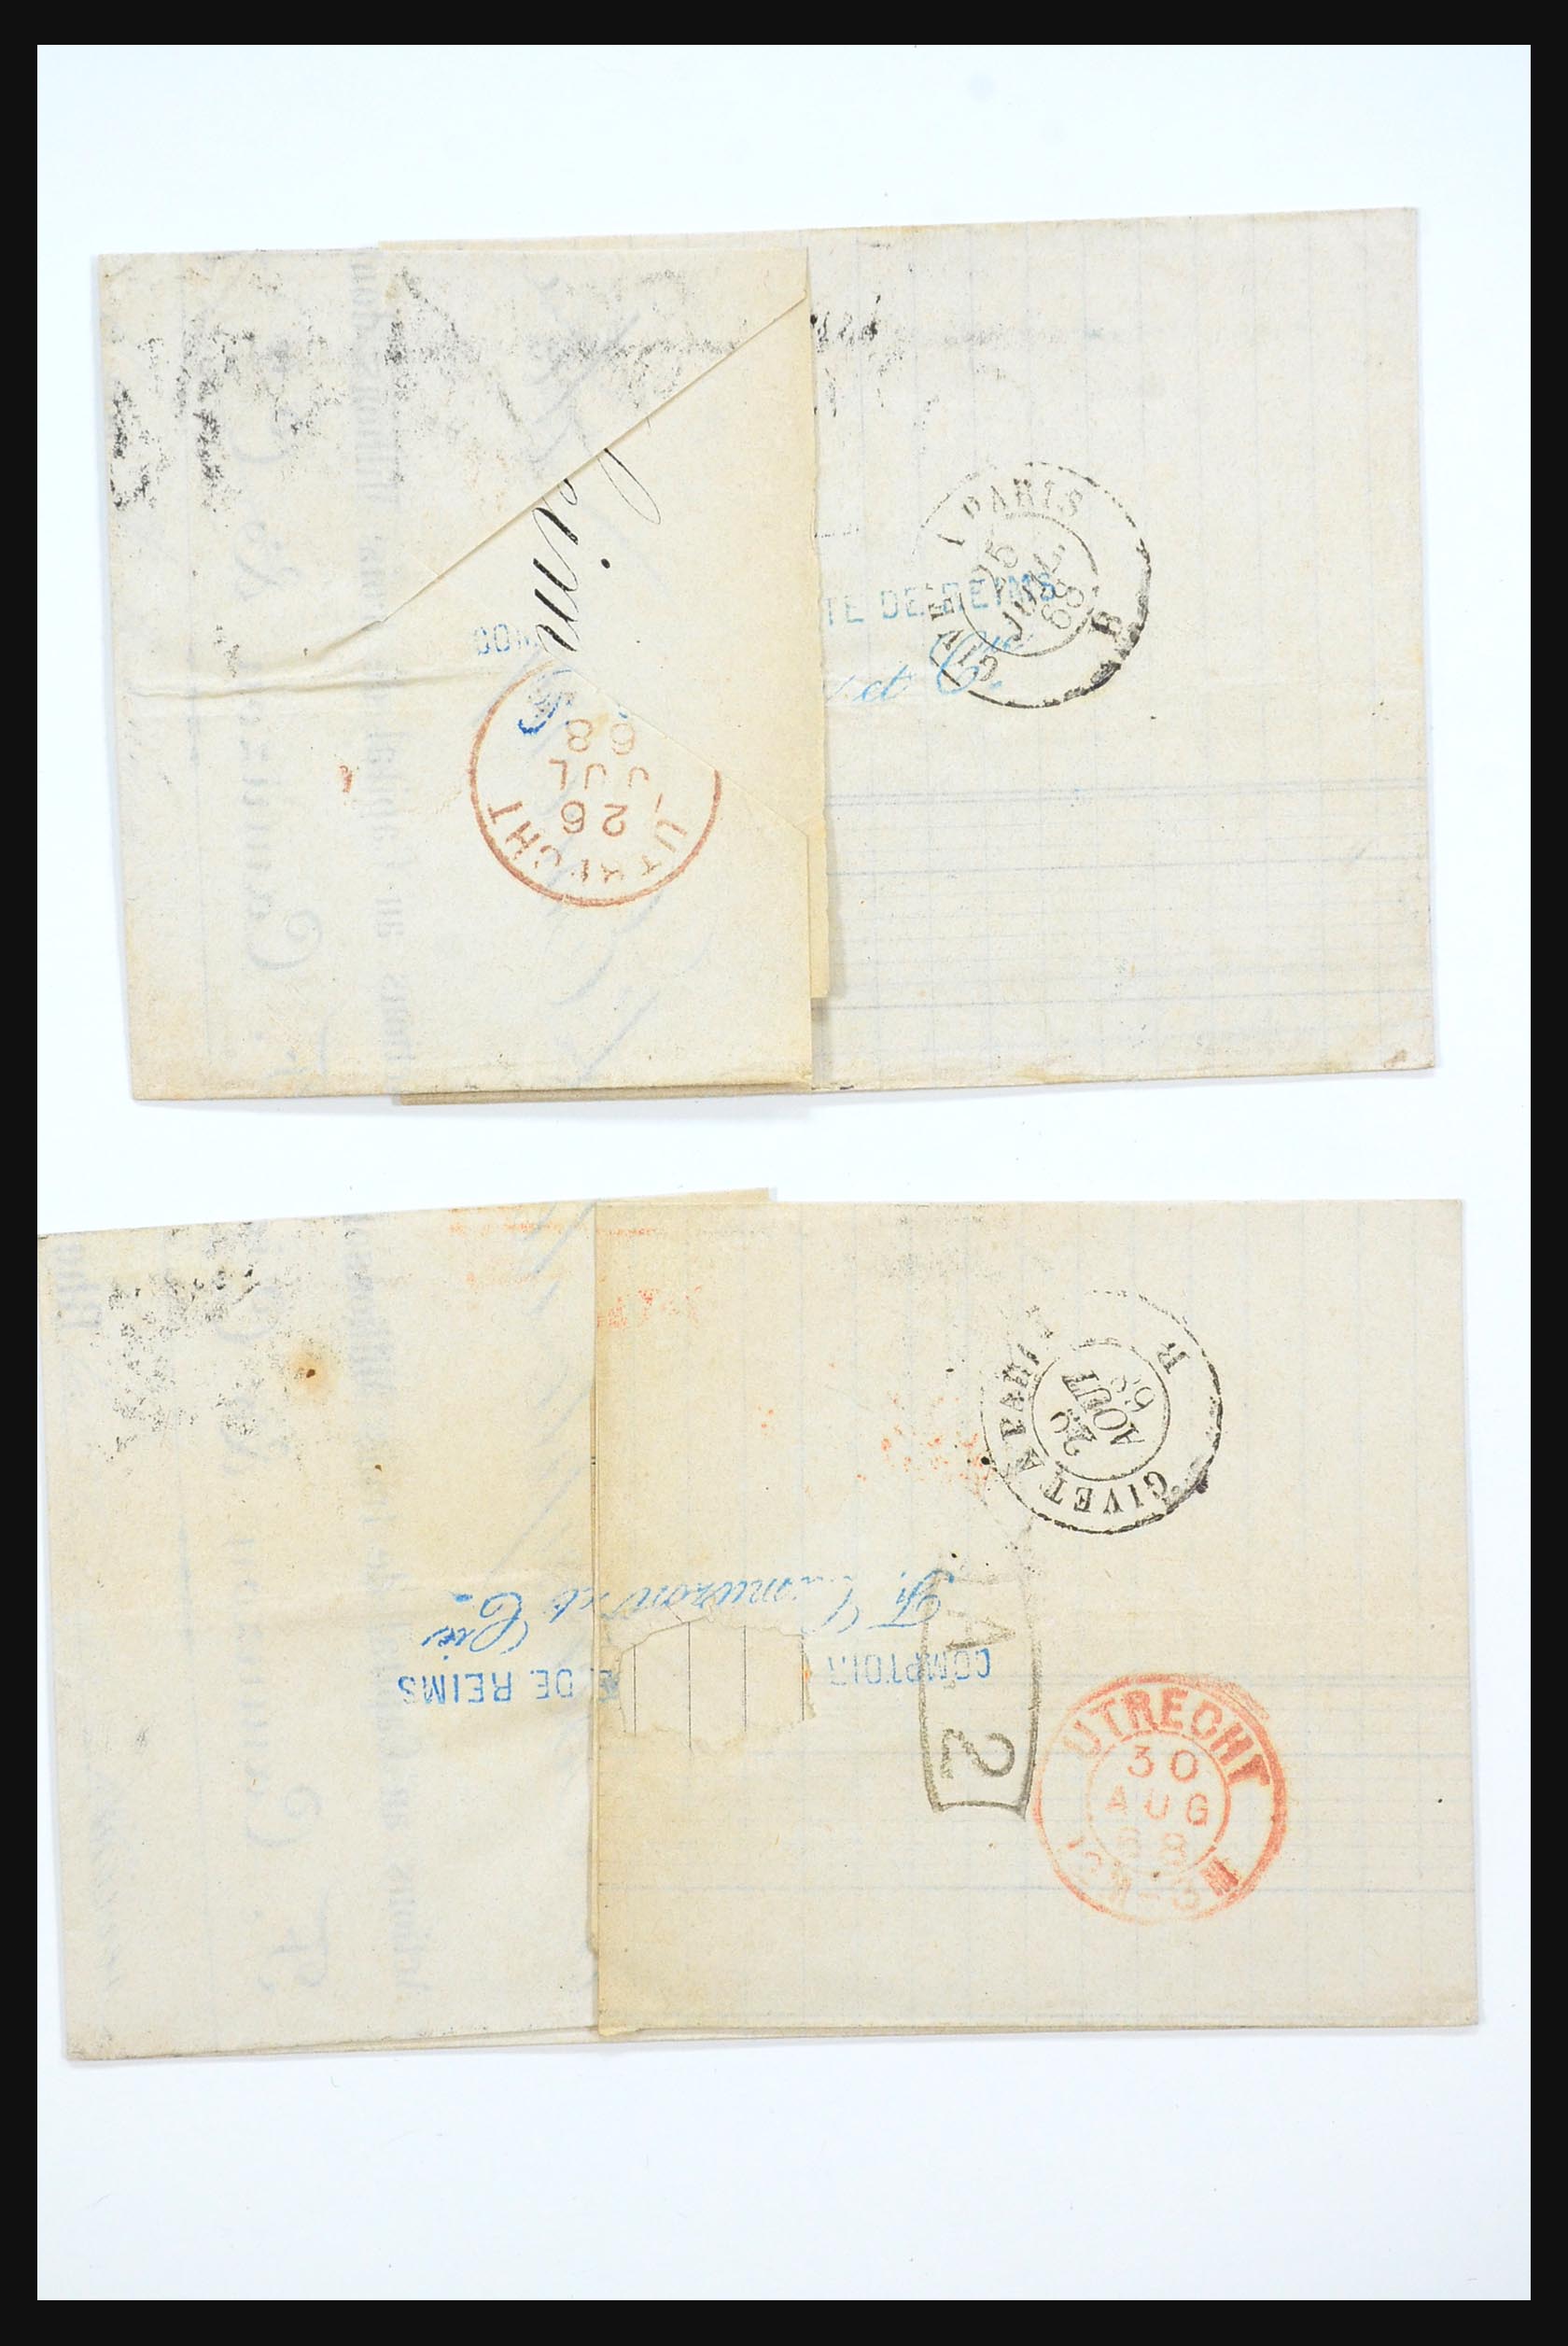 31359 0004 - 31359 France and Colonies covers 1770-1960.